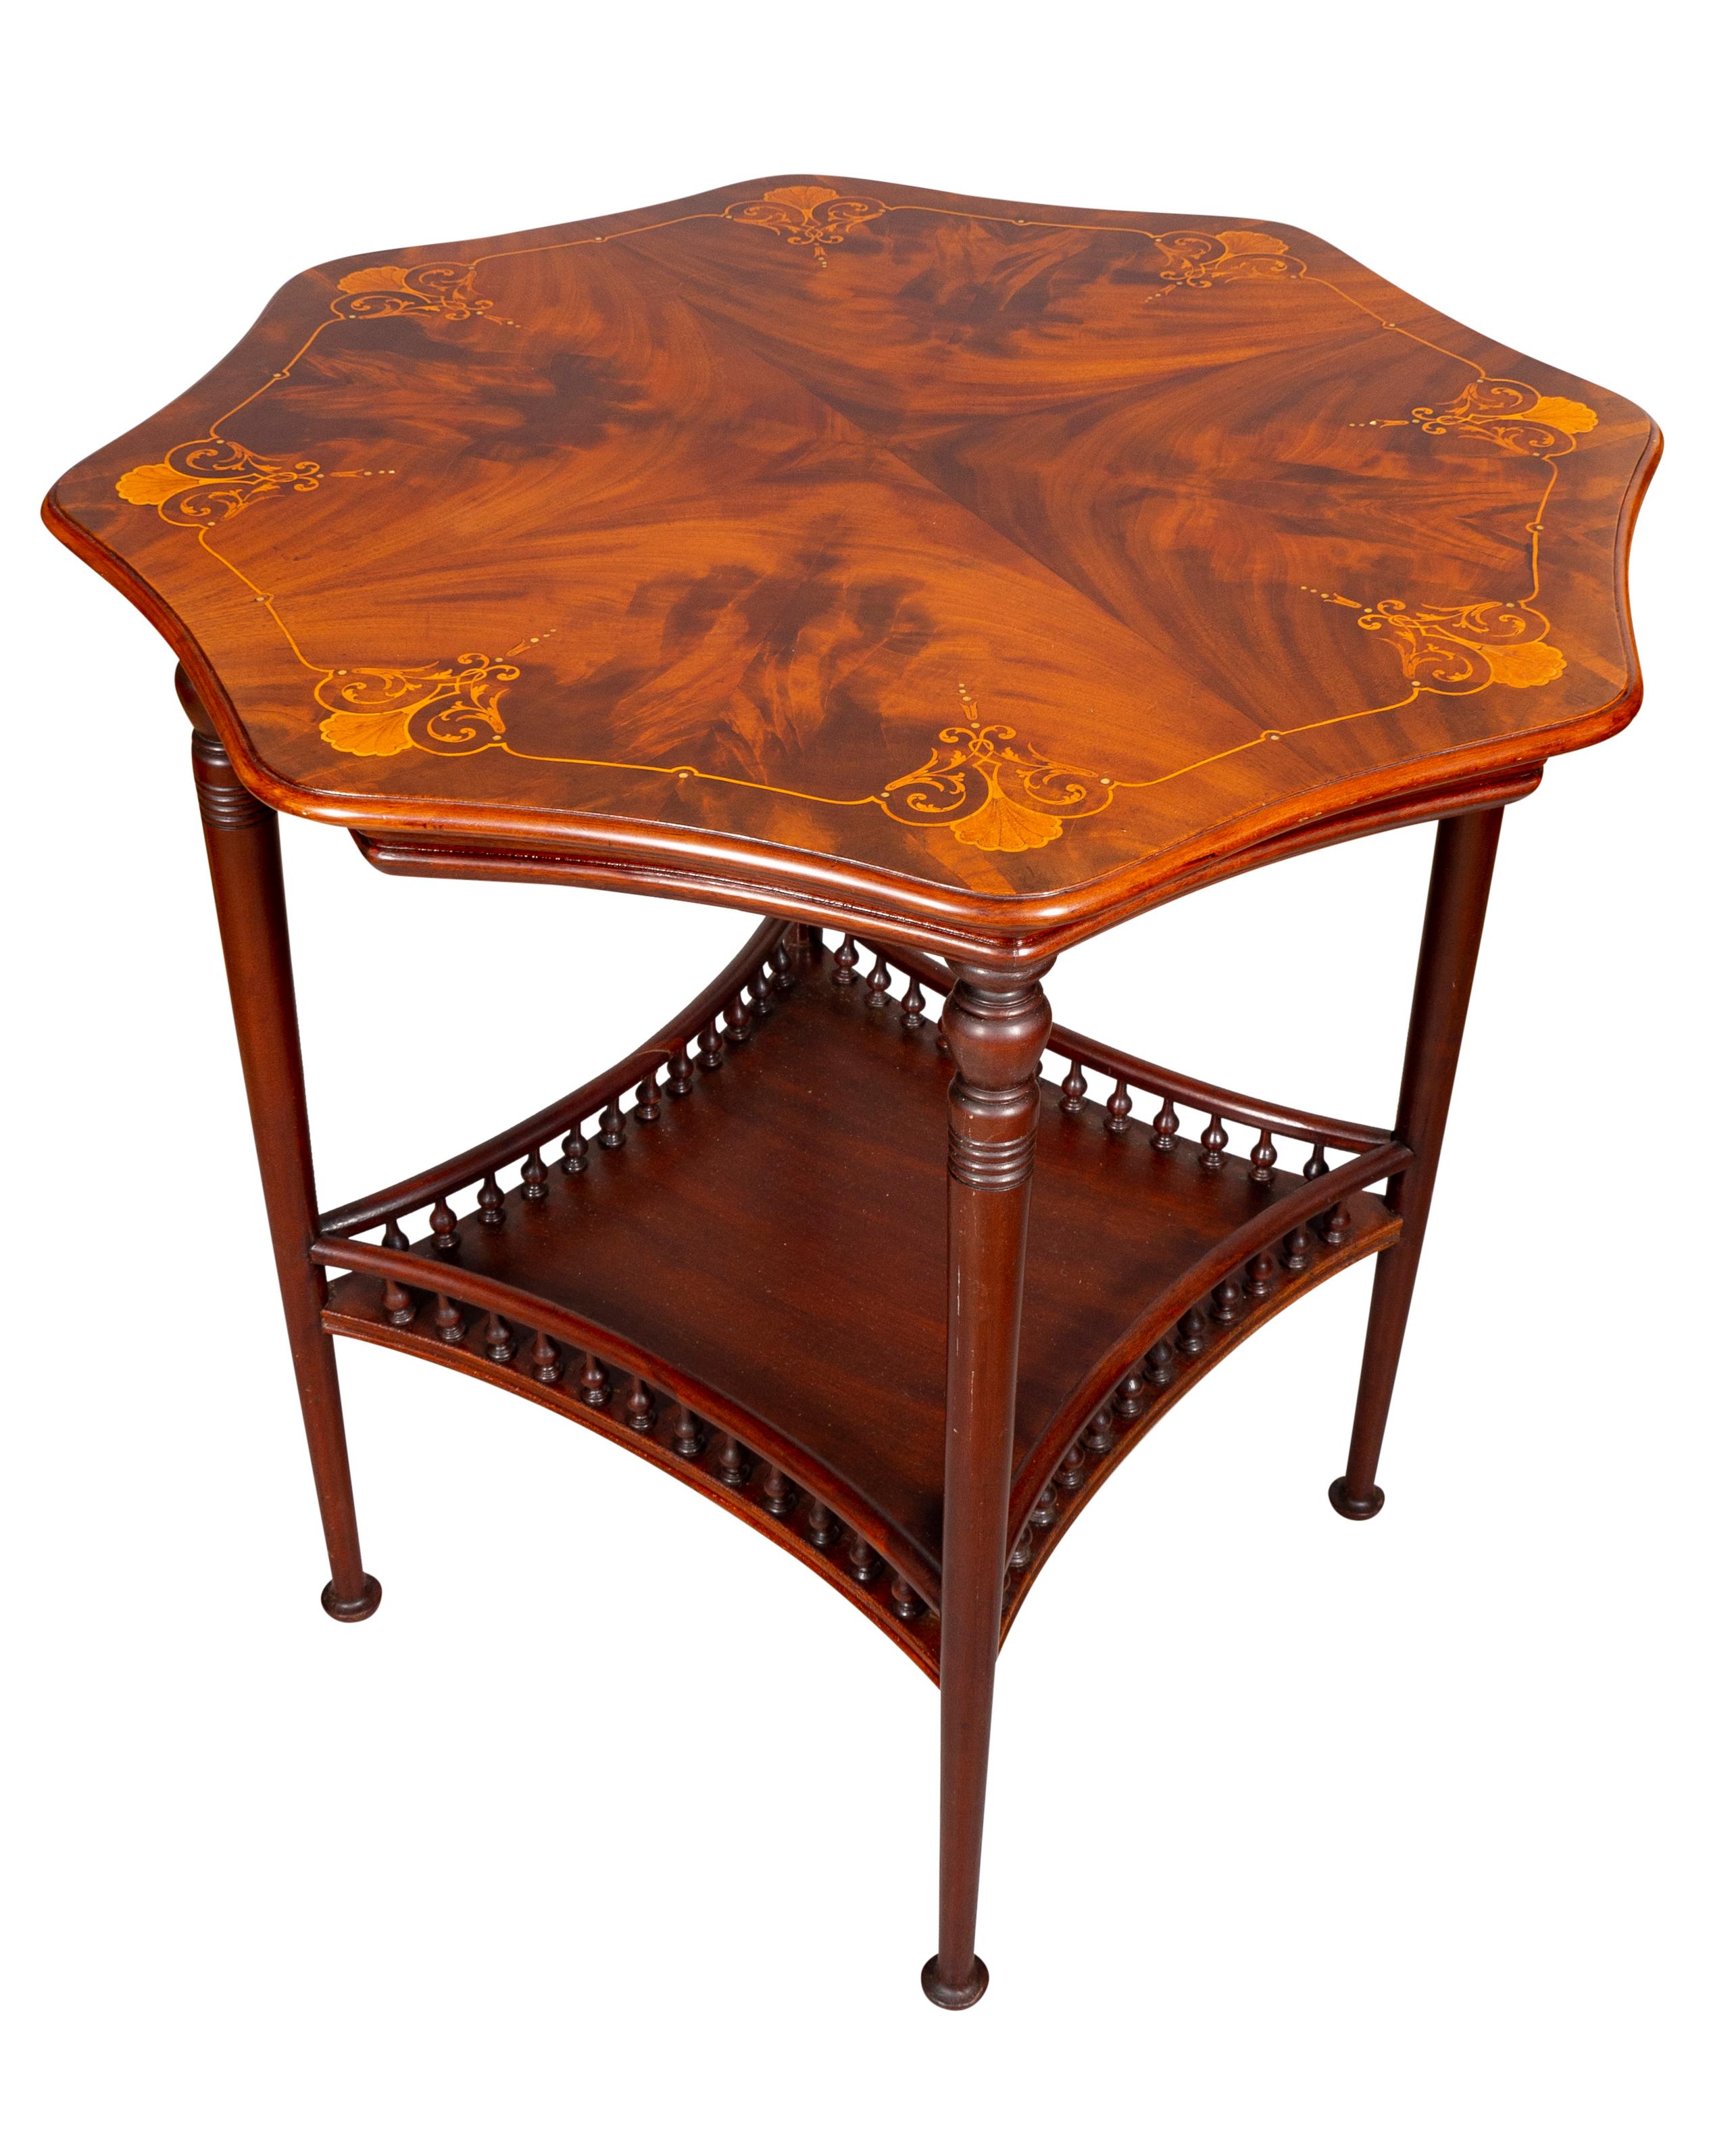 American Aesthetic Mahogany and Inlaid Table In Good Condition For Sale In Essex, MA